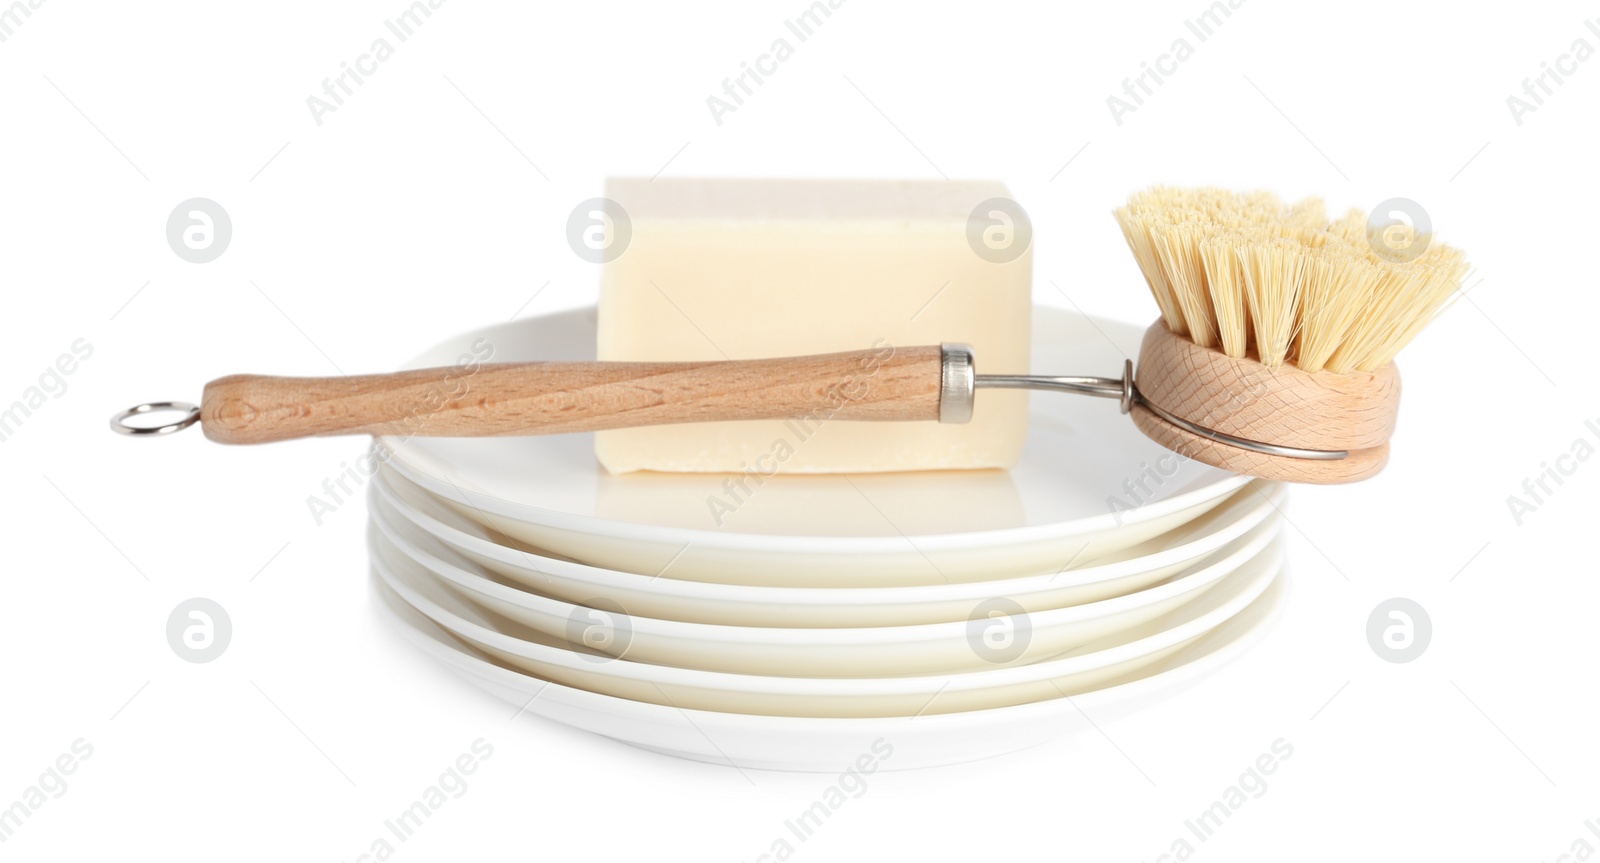 Photo of Cleaning brush and soap bar for dish washing on plates against white background